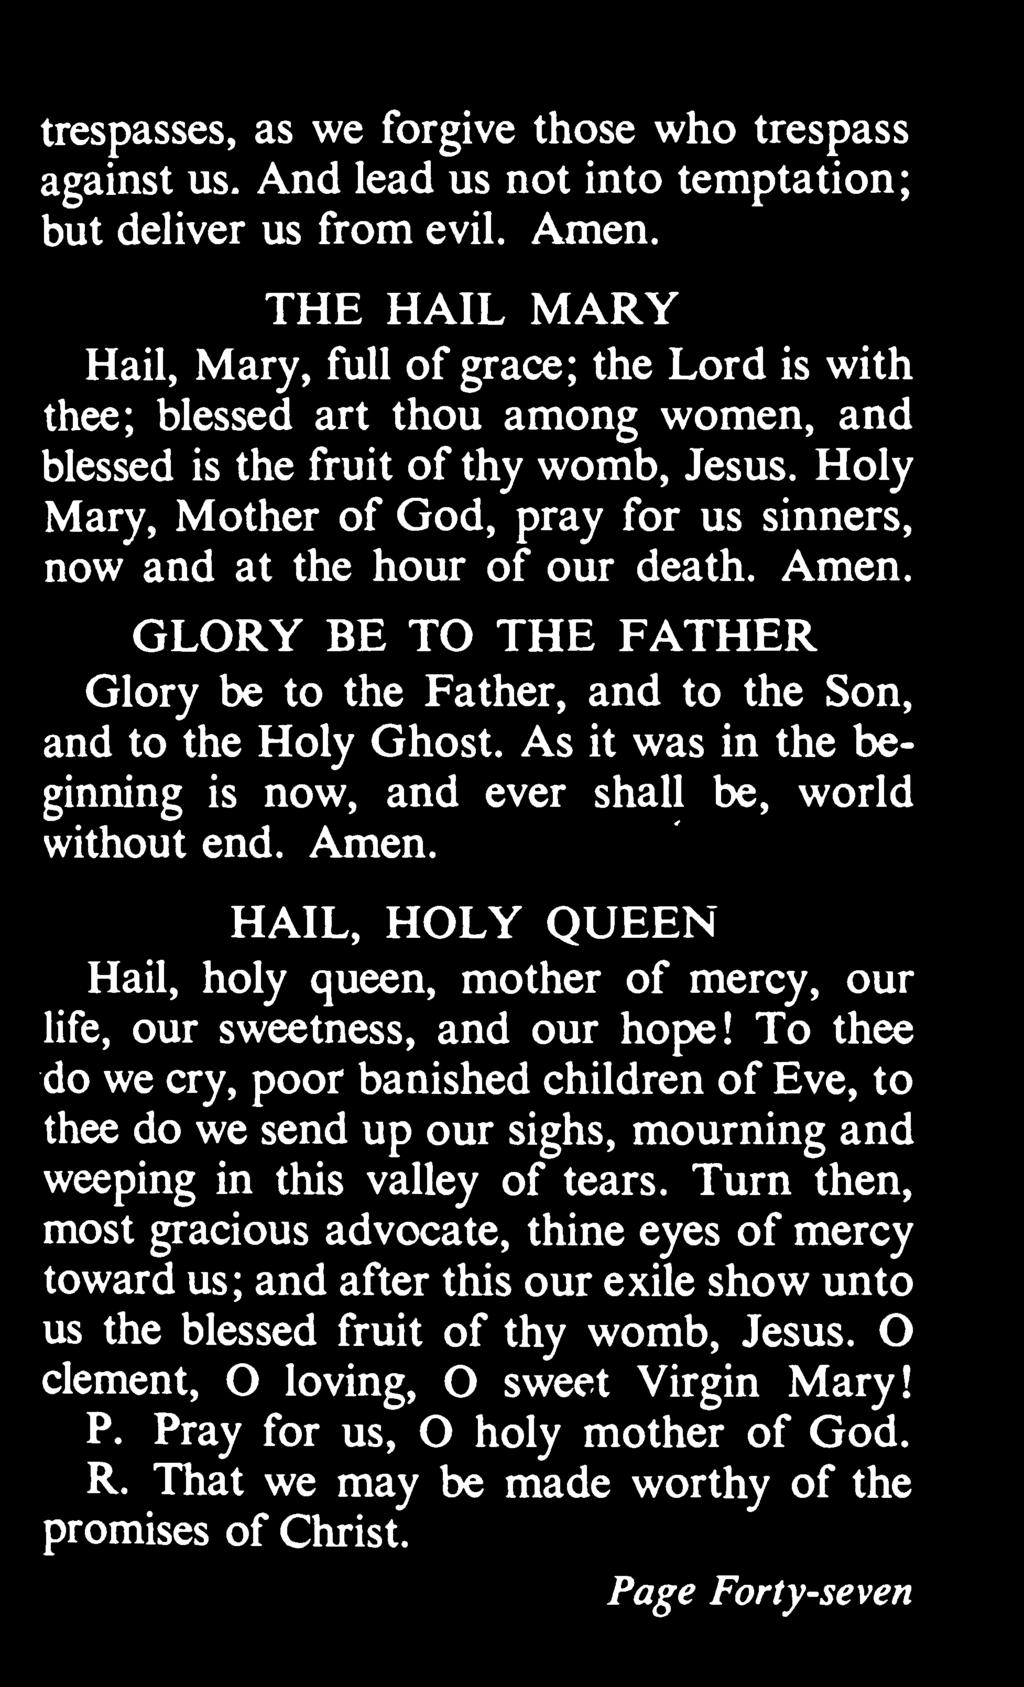 Holy Mary, Mother of God, pray for us sinners, now and at the hour of our death. Amen. GLORY BE TO THE FATHER Glory be to the Father, and to the Son, and to the Holy Ghost.